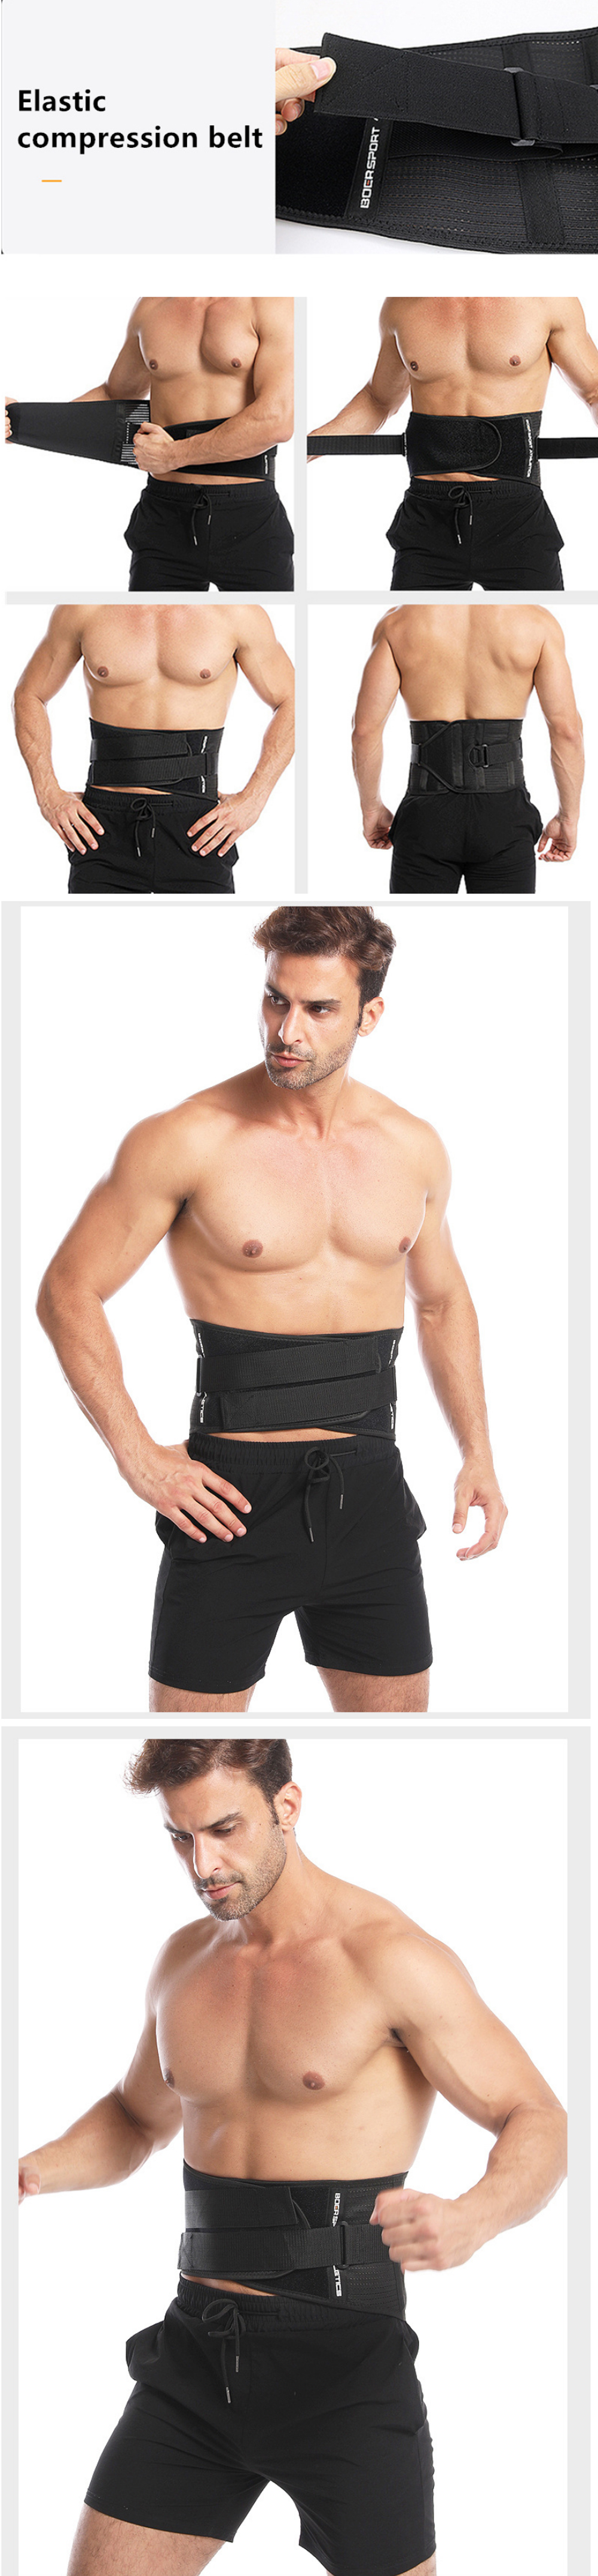 BOER-Waist-Support-Lumbar-Sports-Safety-Brace-Belt-with-Metal-Spring-Strip-for-Gym-Fitness-Weightlif-1769558-3